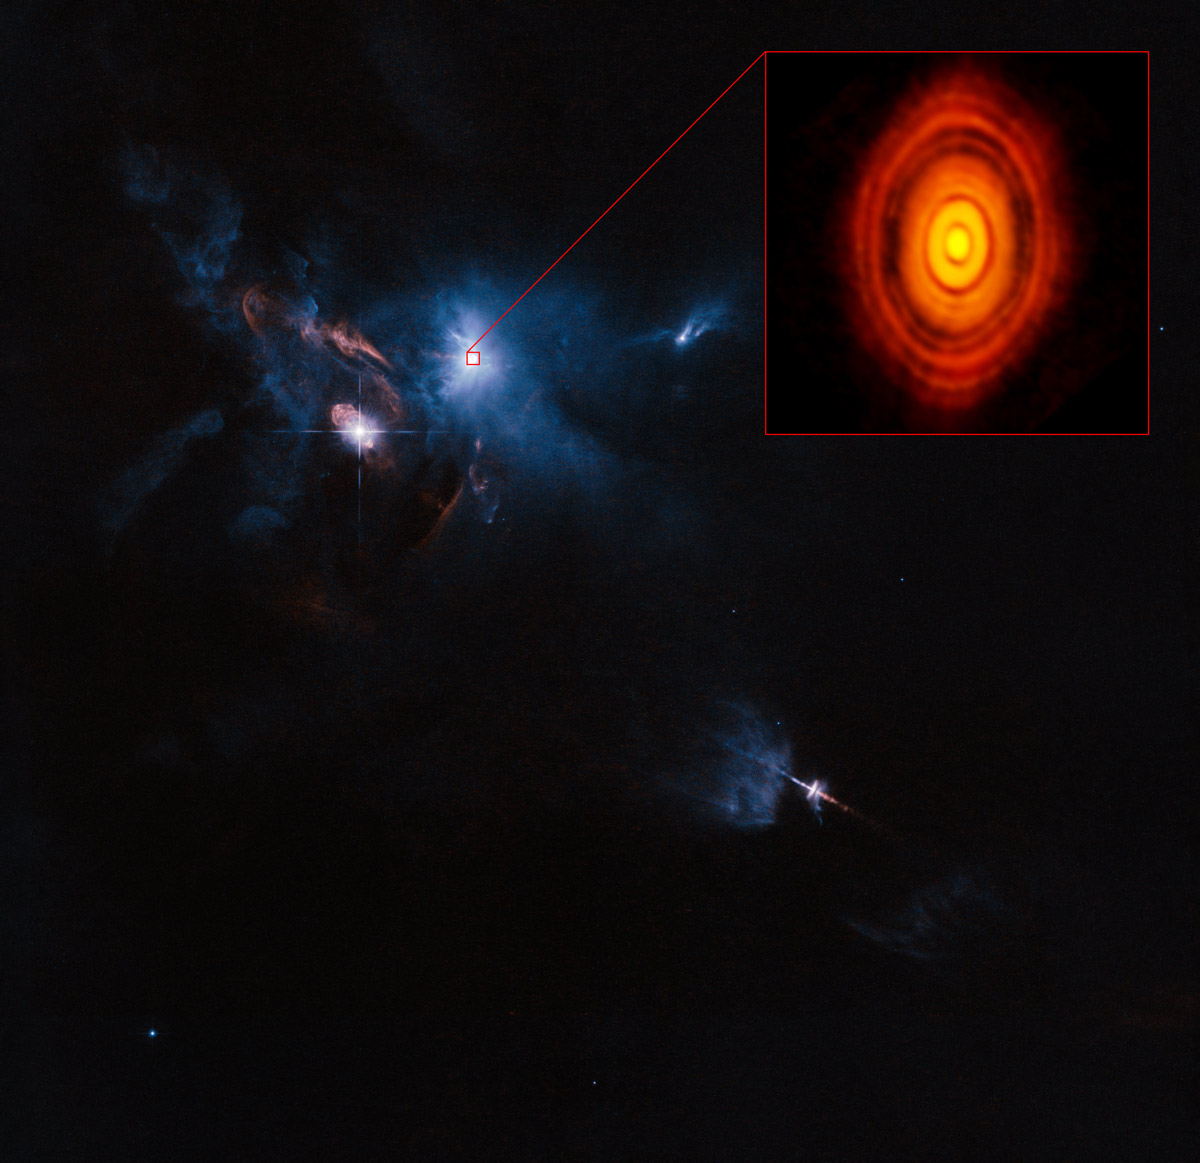 <p>This is the sharpest image ever taken by ALMA — sharper than is routinely achieved in visible light with the NASA/ESA Hubble Space Telescope. It shows the protoplanetary disc surrounding the young star HL Tauri. These new ALMA observations reveal substructures within the disc that have never been seen before and even show the possible positions of planets forming in the dark patches within the system. Credit: ALMA (ESO/NAOJ/NRAO)</p>
